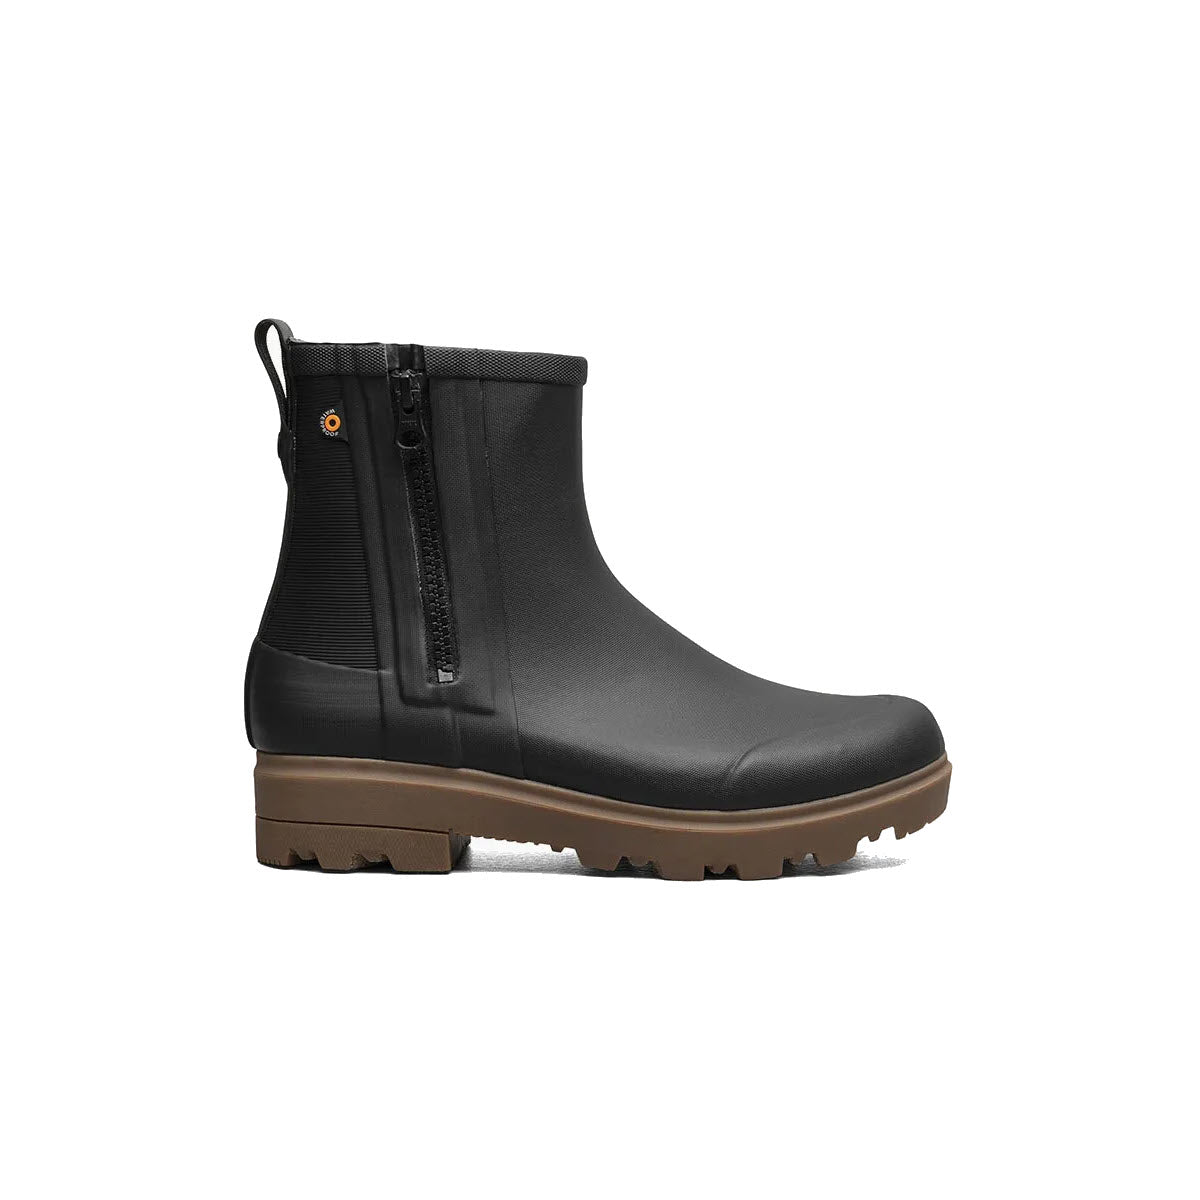 Bogs black leather waterproof ankle boot with a brown sole, featuring a zipper on the inner side and a pull tab on the back.